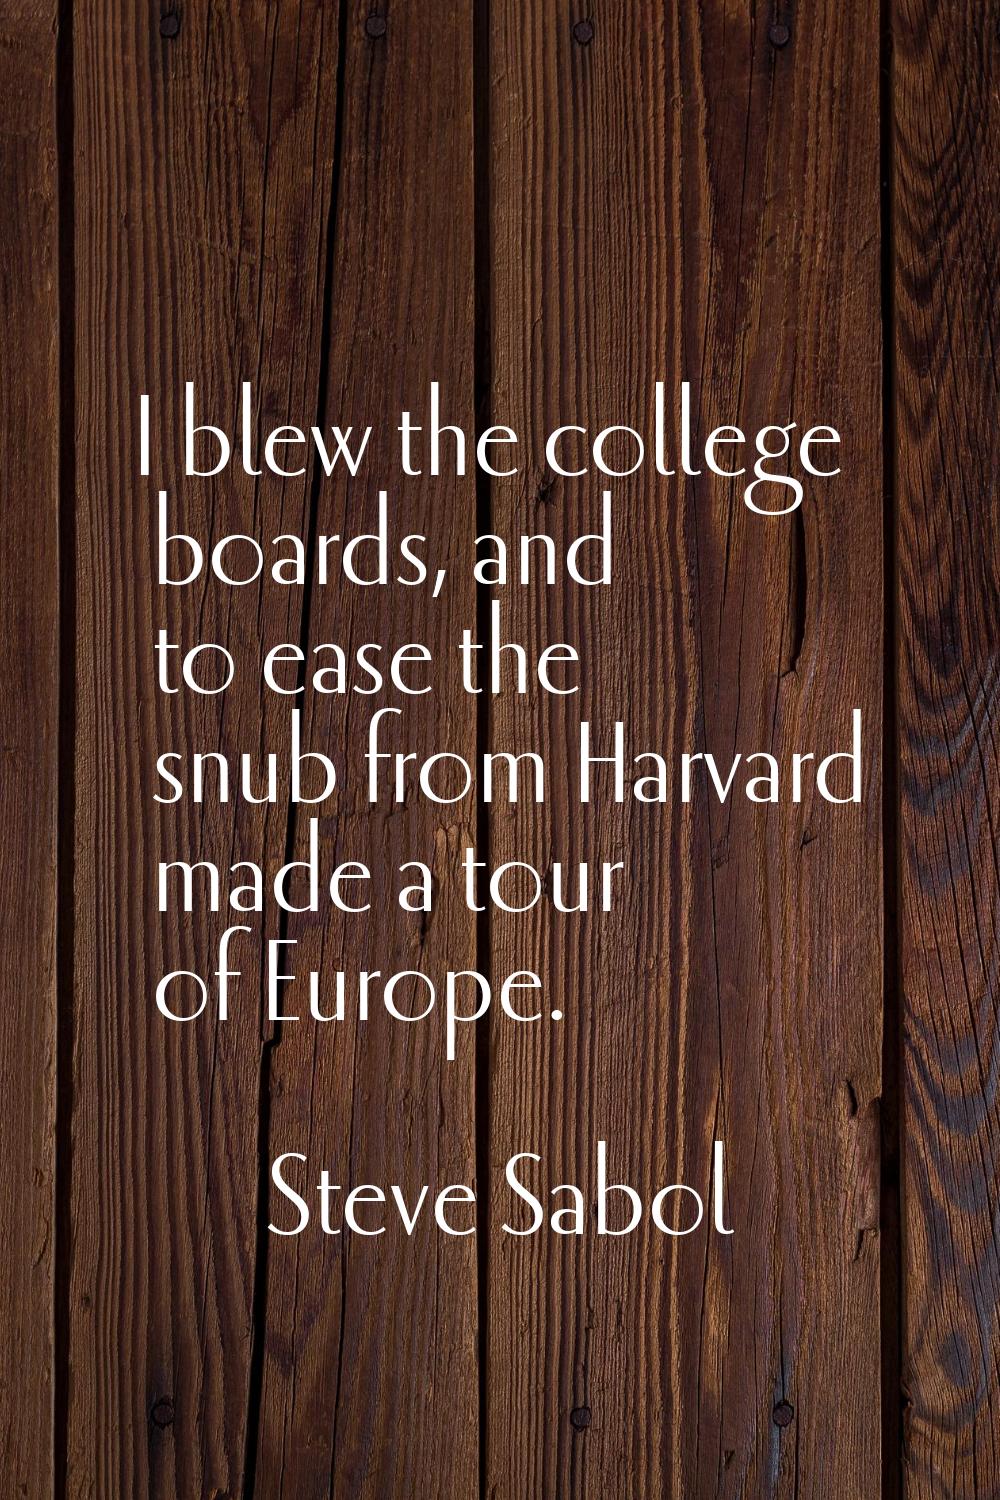 I blew the college boards, and to ease the snub from Harvard made a tour of Europe.